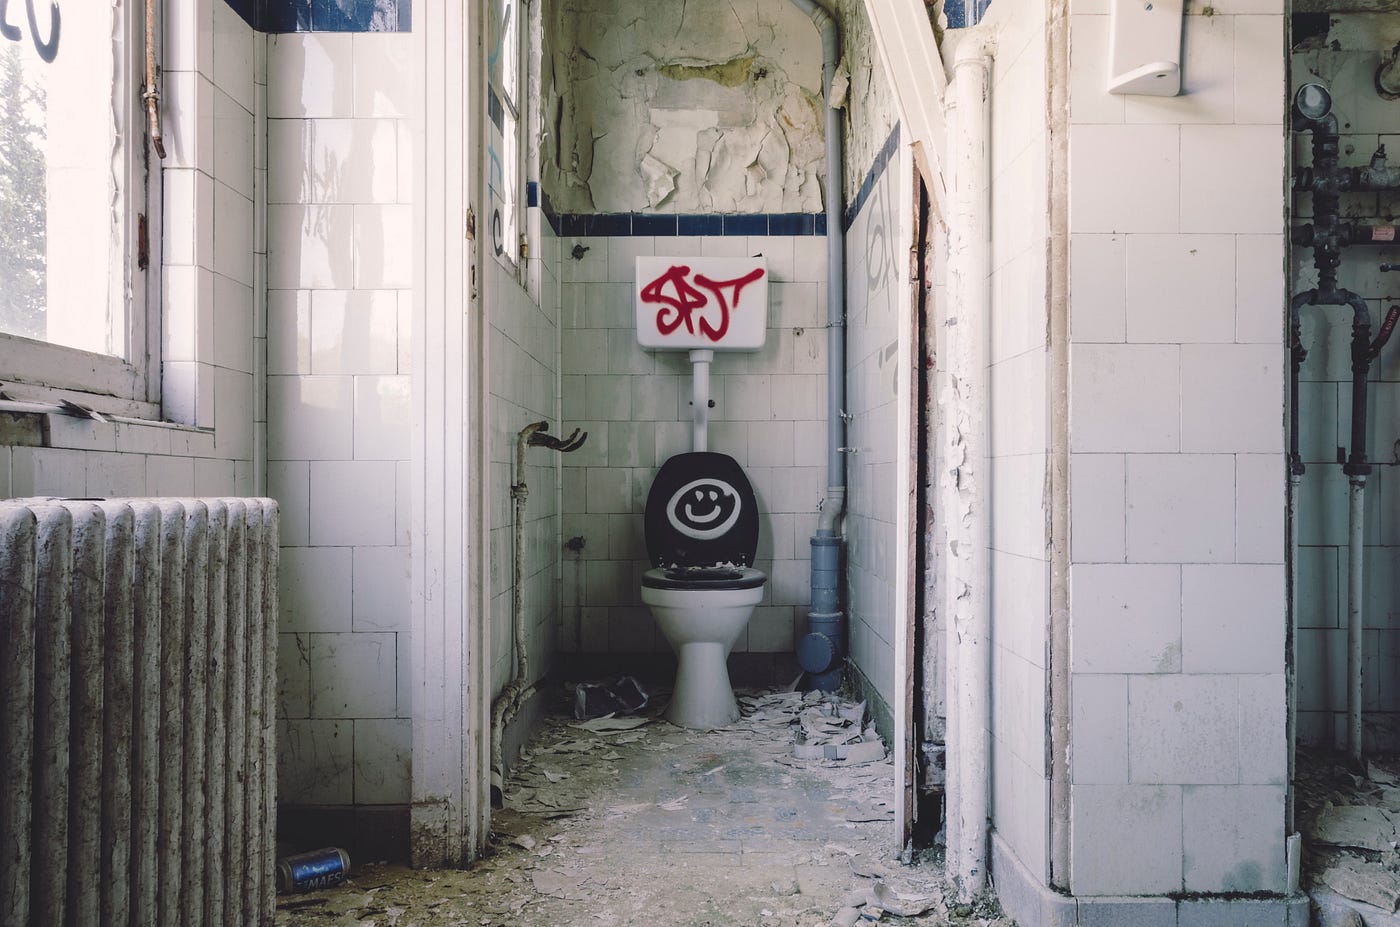 The Terror in the Toilet Whats Up With Bathroom Ghosts, and Why Are They Watching OUR Unfinished Business? by Cat Baklarz Writers Blokke Medium pic